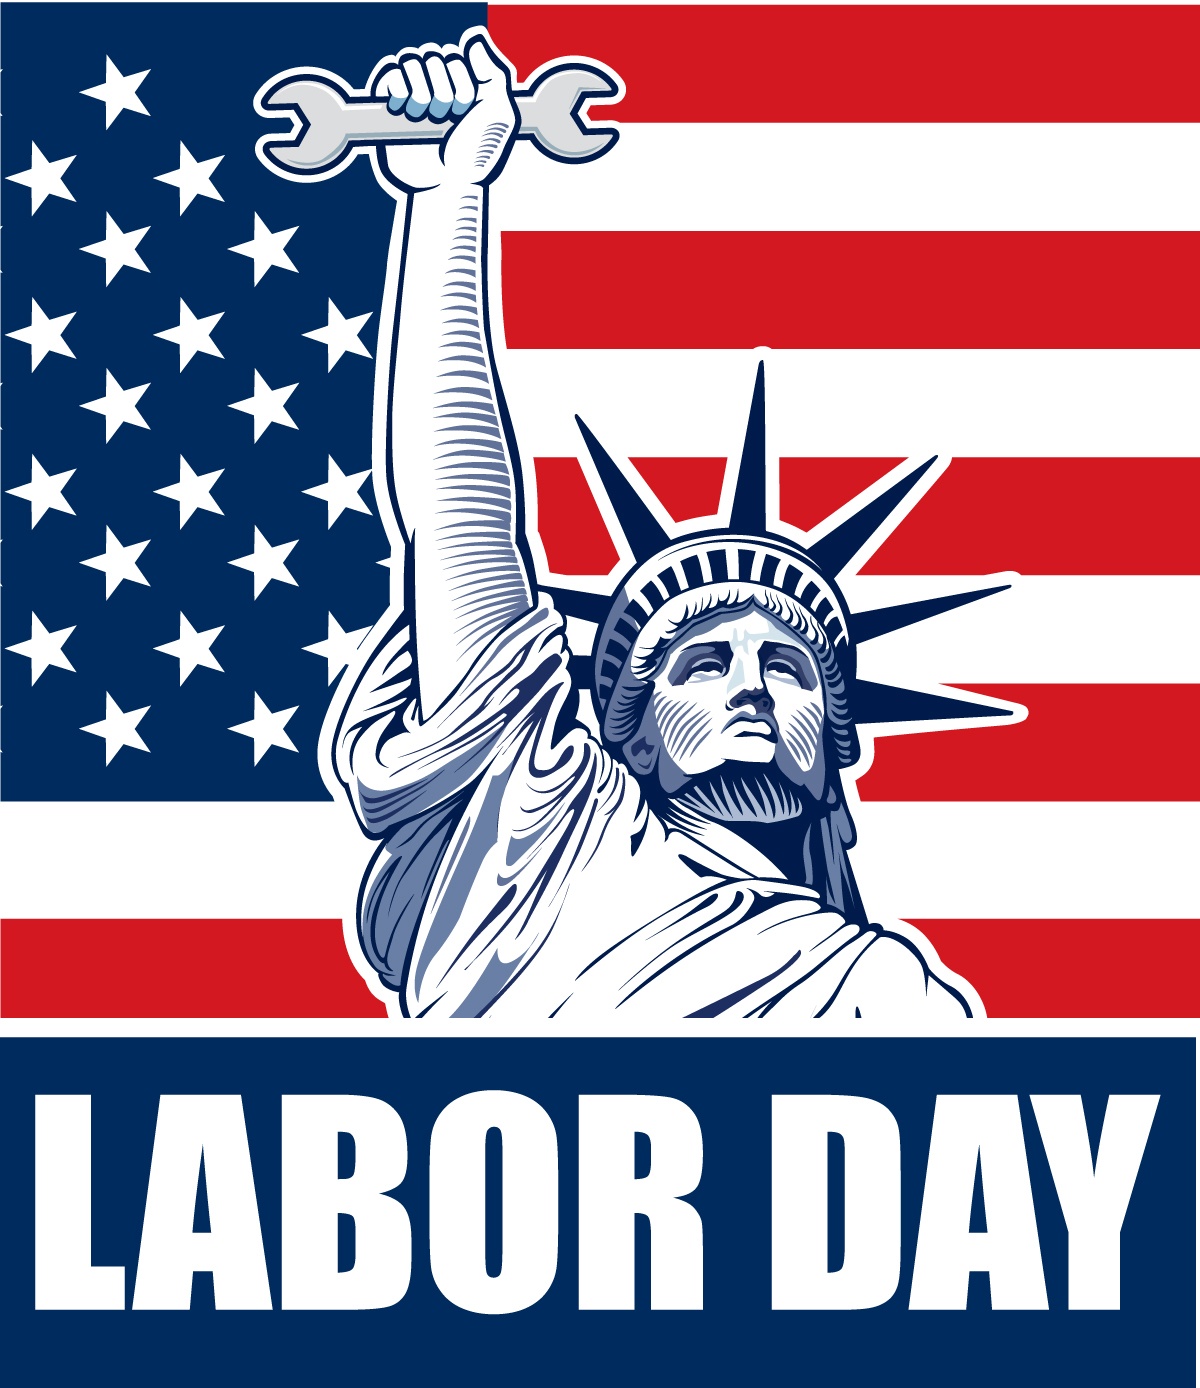 Why Labor Day is worth celebrating - Labor Day weekend is much-anticipated. Many people look forward to Labor Day weekend because it offers one last extended break to enjoy summer weather. #LaborDay